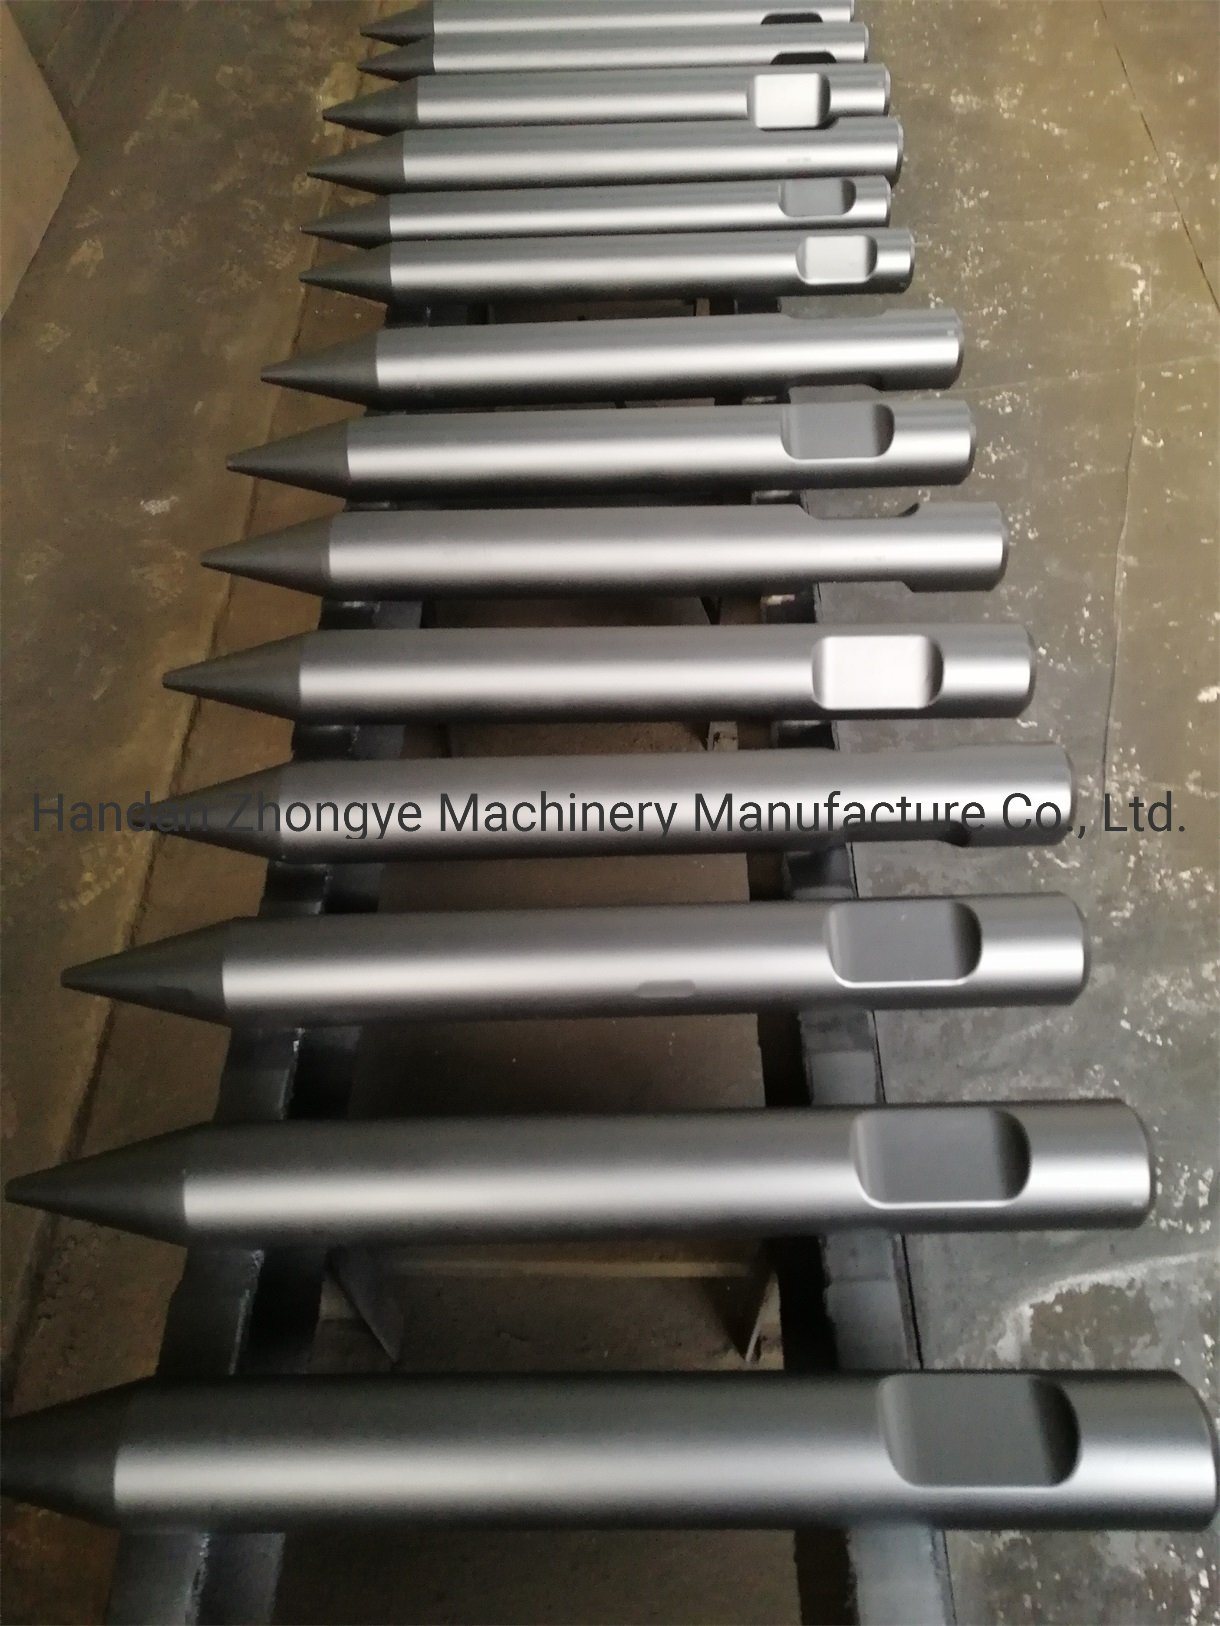 Factory For Set Screw With Through Hole - Rock Breaker Chisels for Excavating Machinery Spare Parts – Zhongye detail pictures